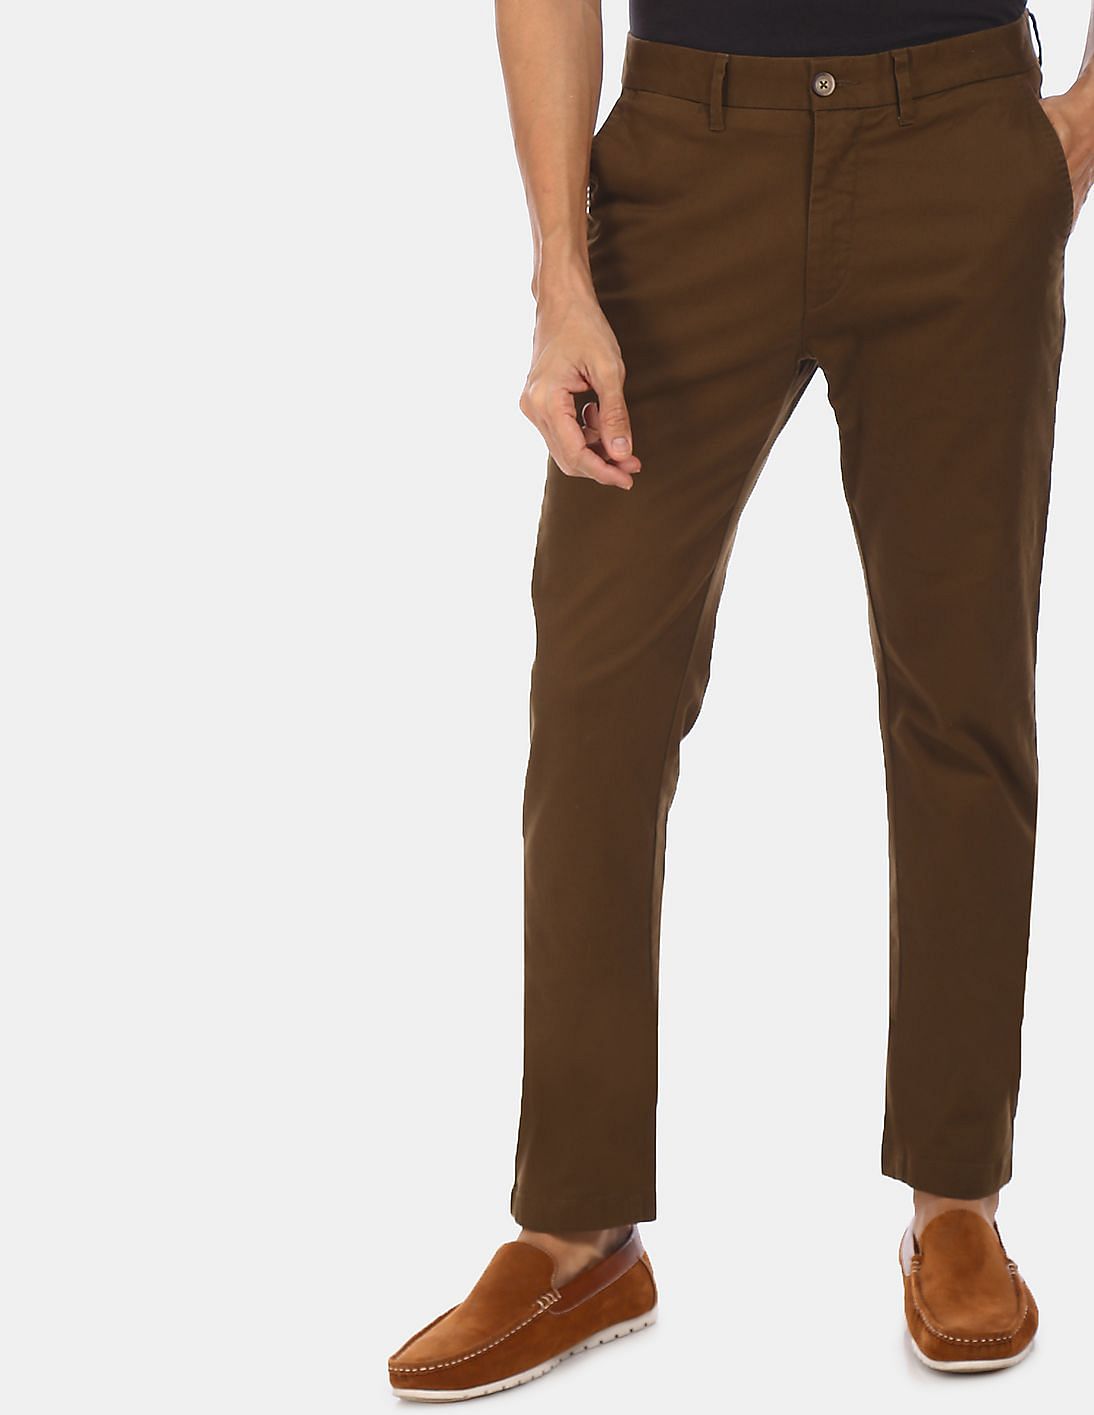 Buy U.S. Polo Assn. Slim Fit Flat Front Trousers - NNNOW.com